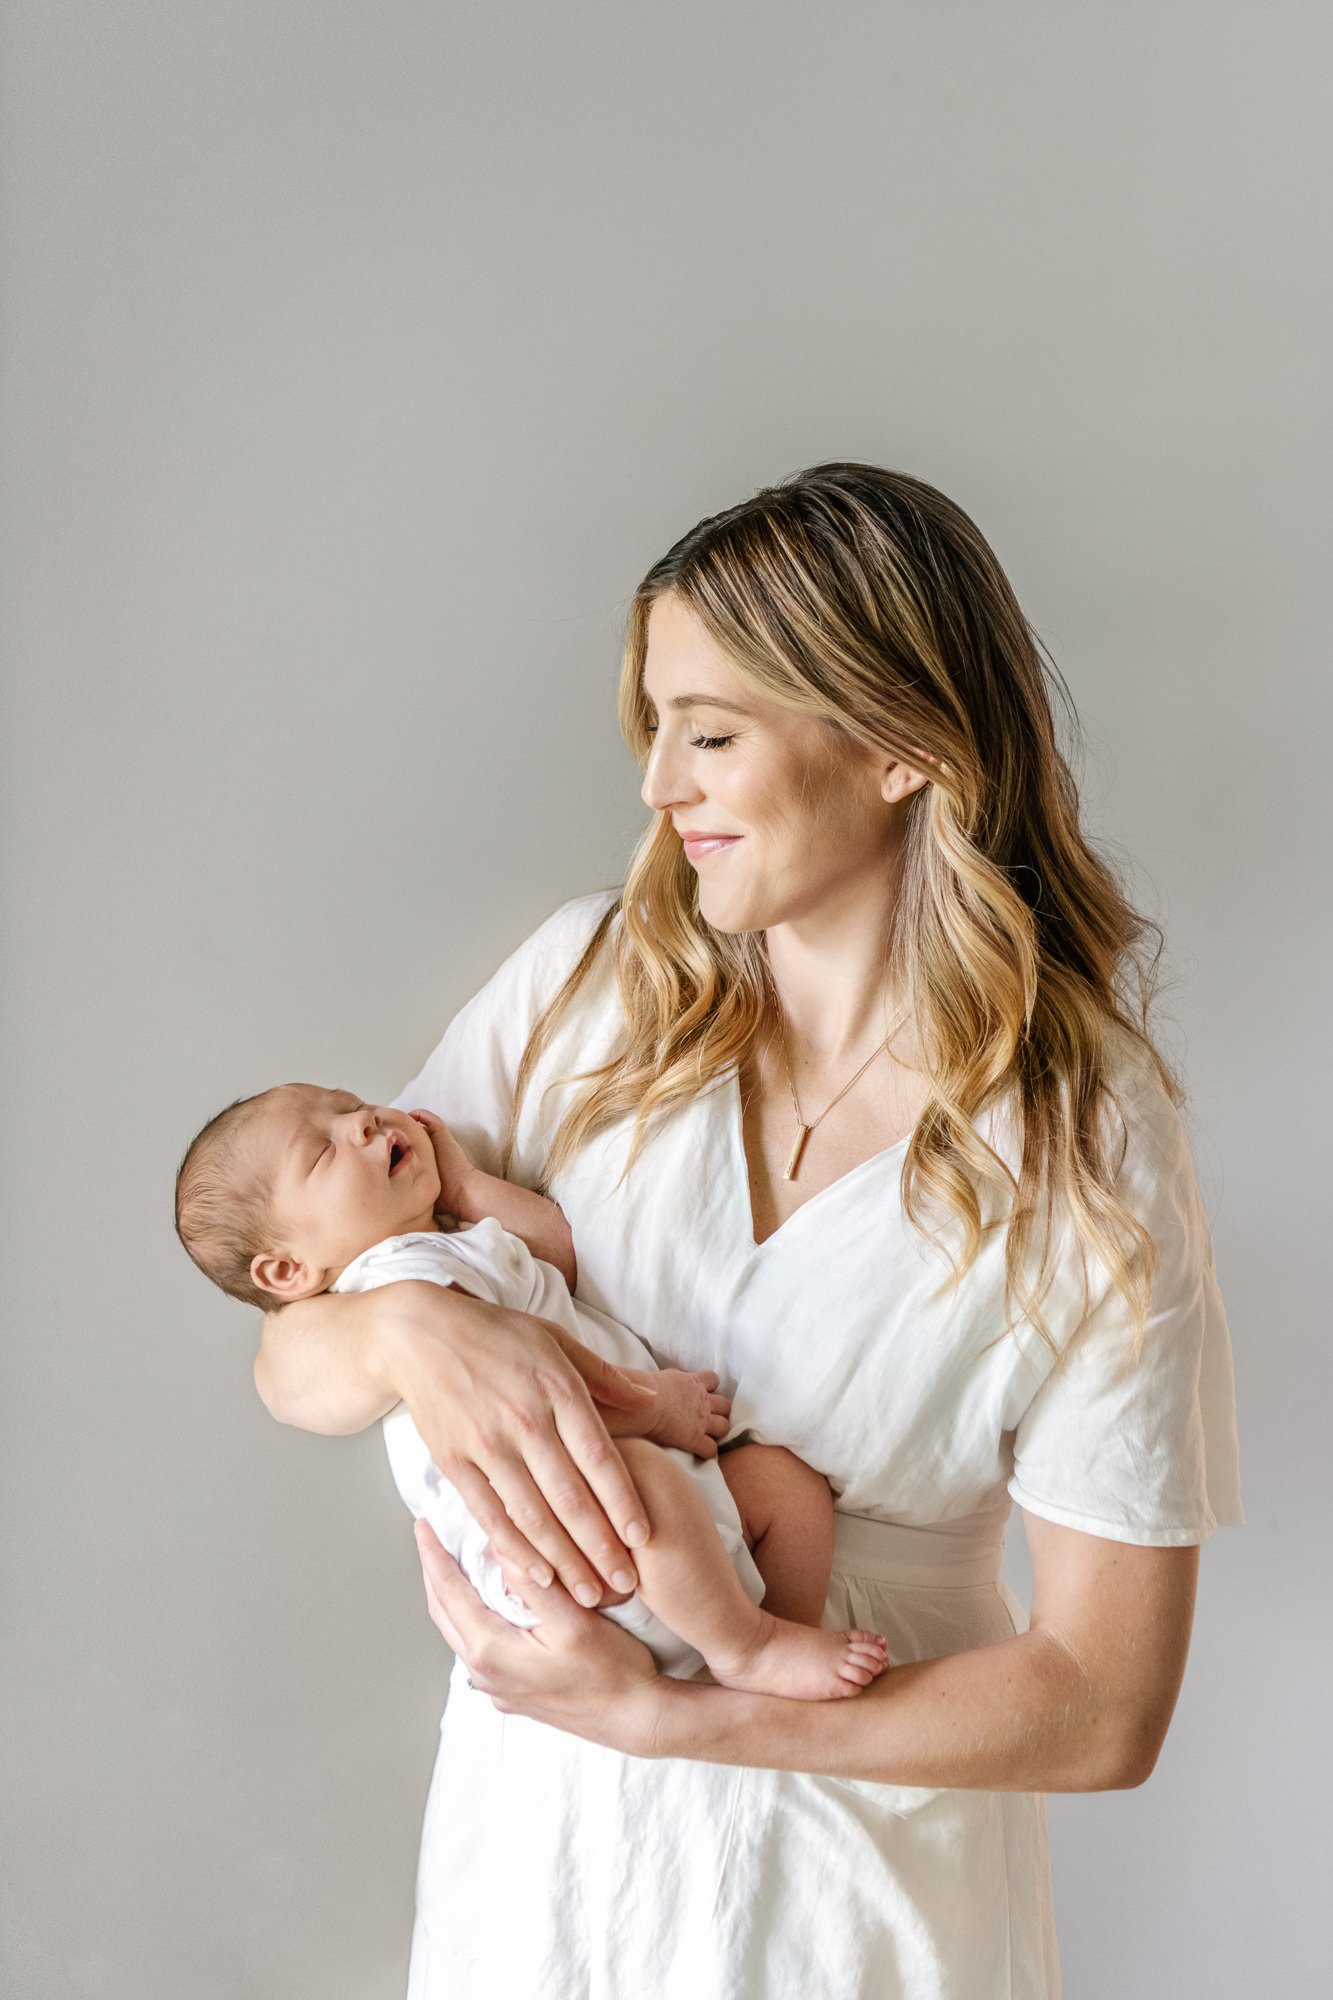  Mom wearing a casual white dress holds her newborn baby boy in her arms while snuggling him close in an affectionate and candid photo. #candidposeinspo #newbornphotography #shorthillsphotographer #familyphotographersinnewjersey #inhomeportraits #new